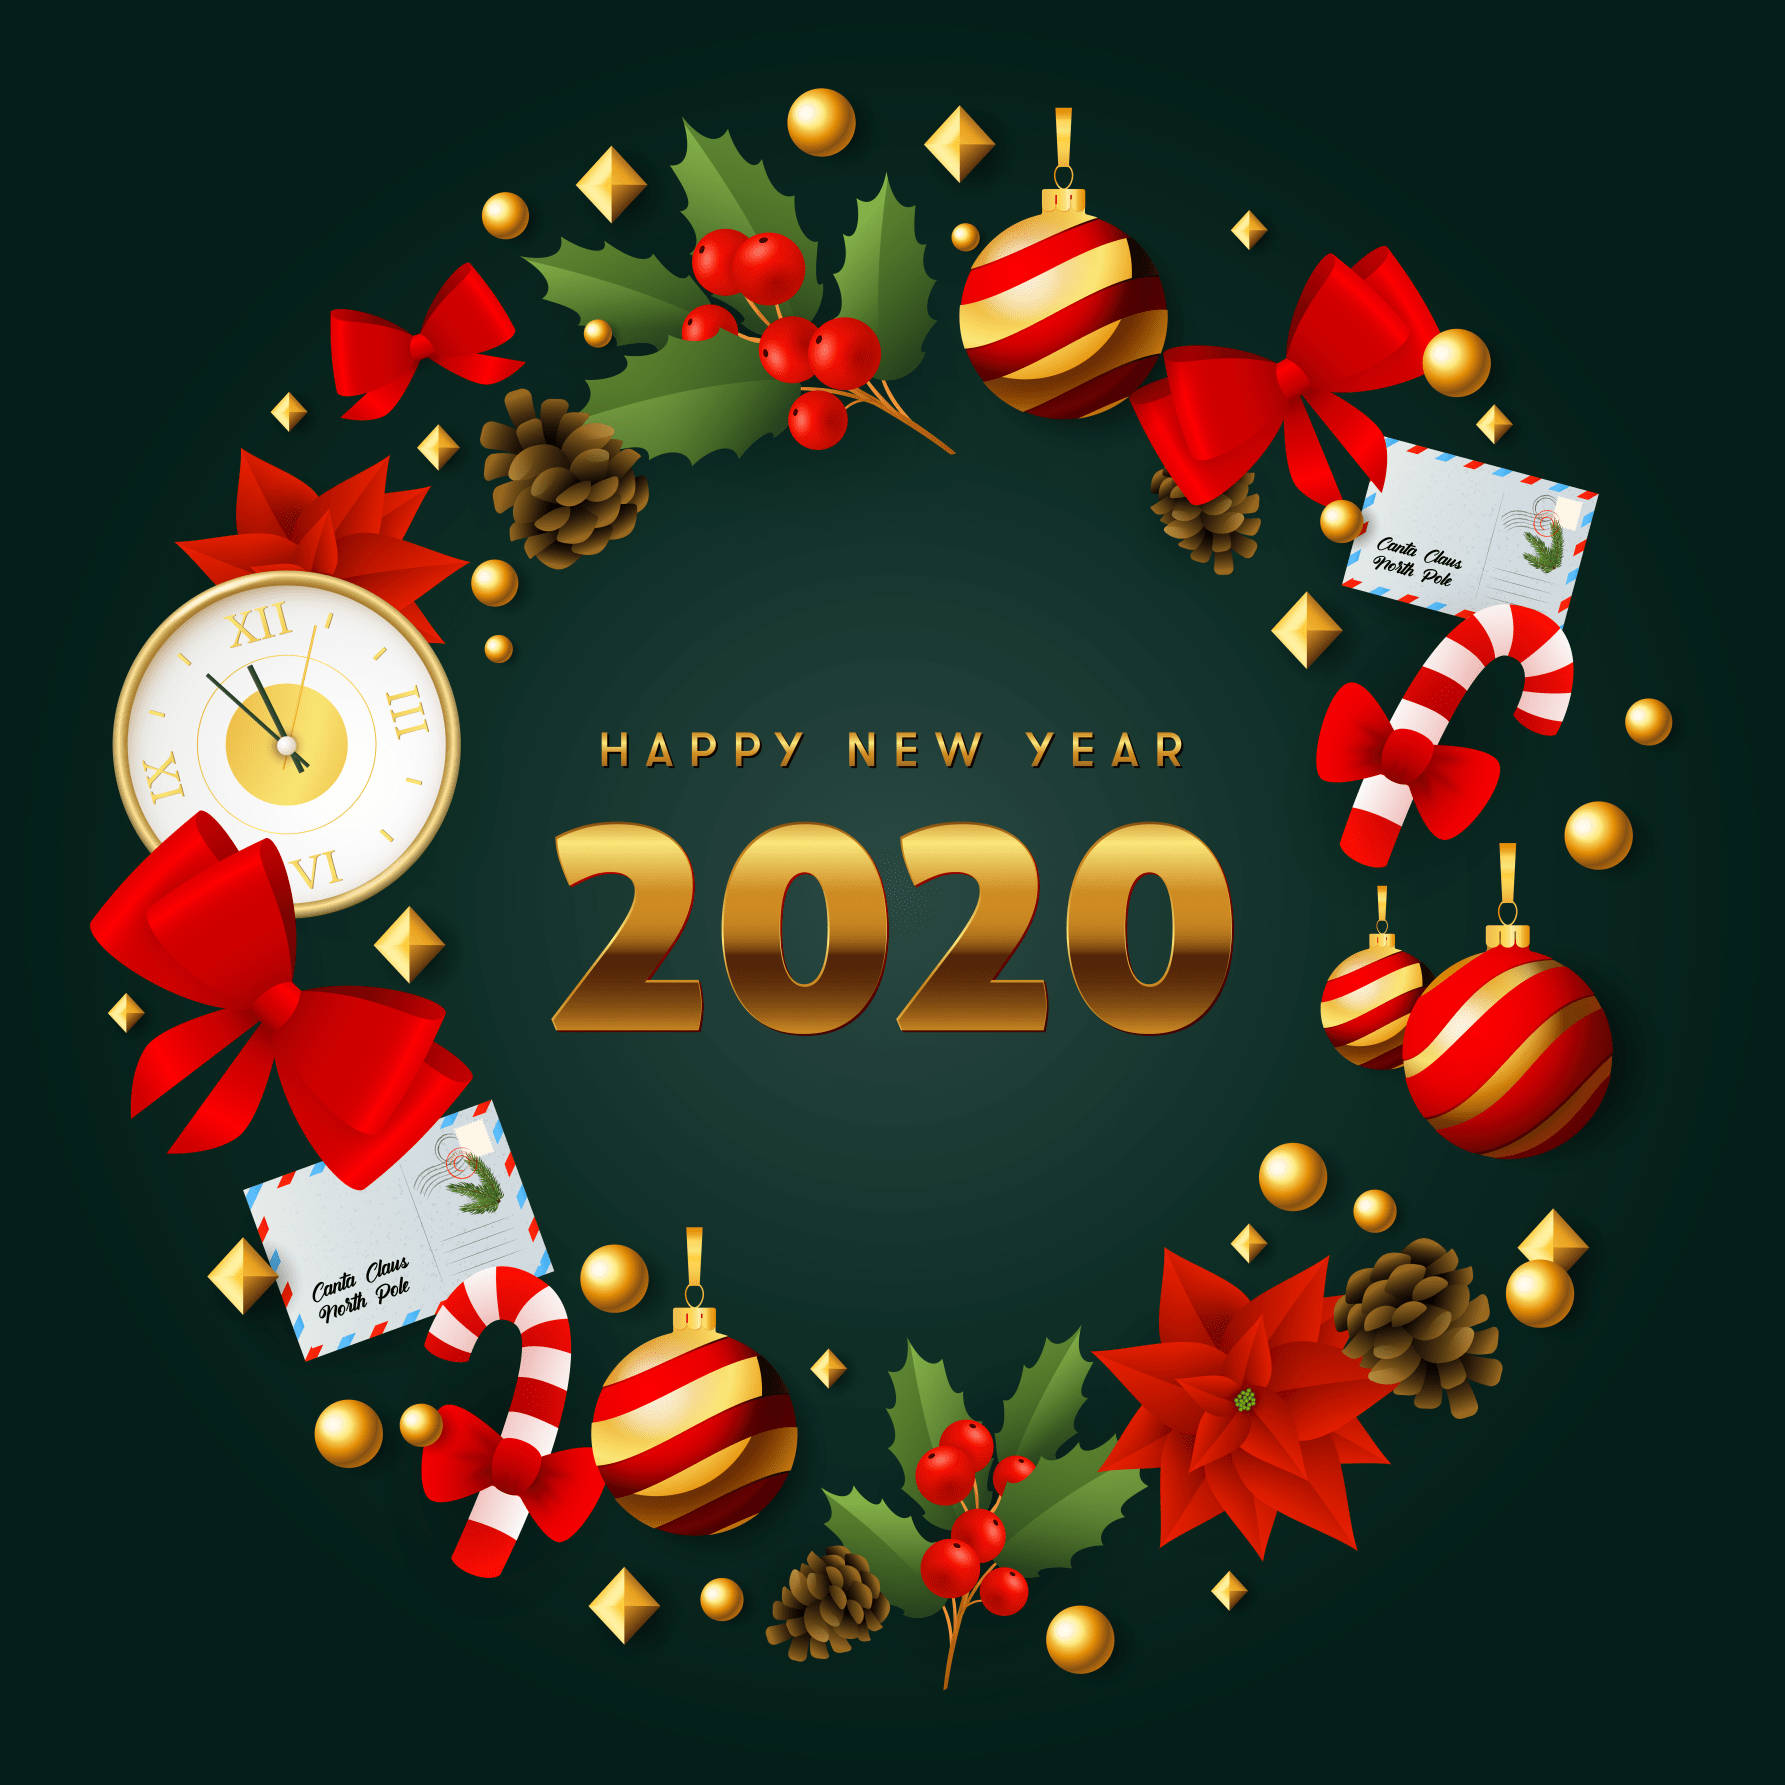 Happy New Year 2020 Quotes, Image, Wishes And Greetings Wallpaper